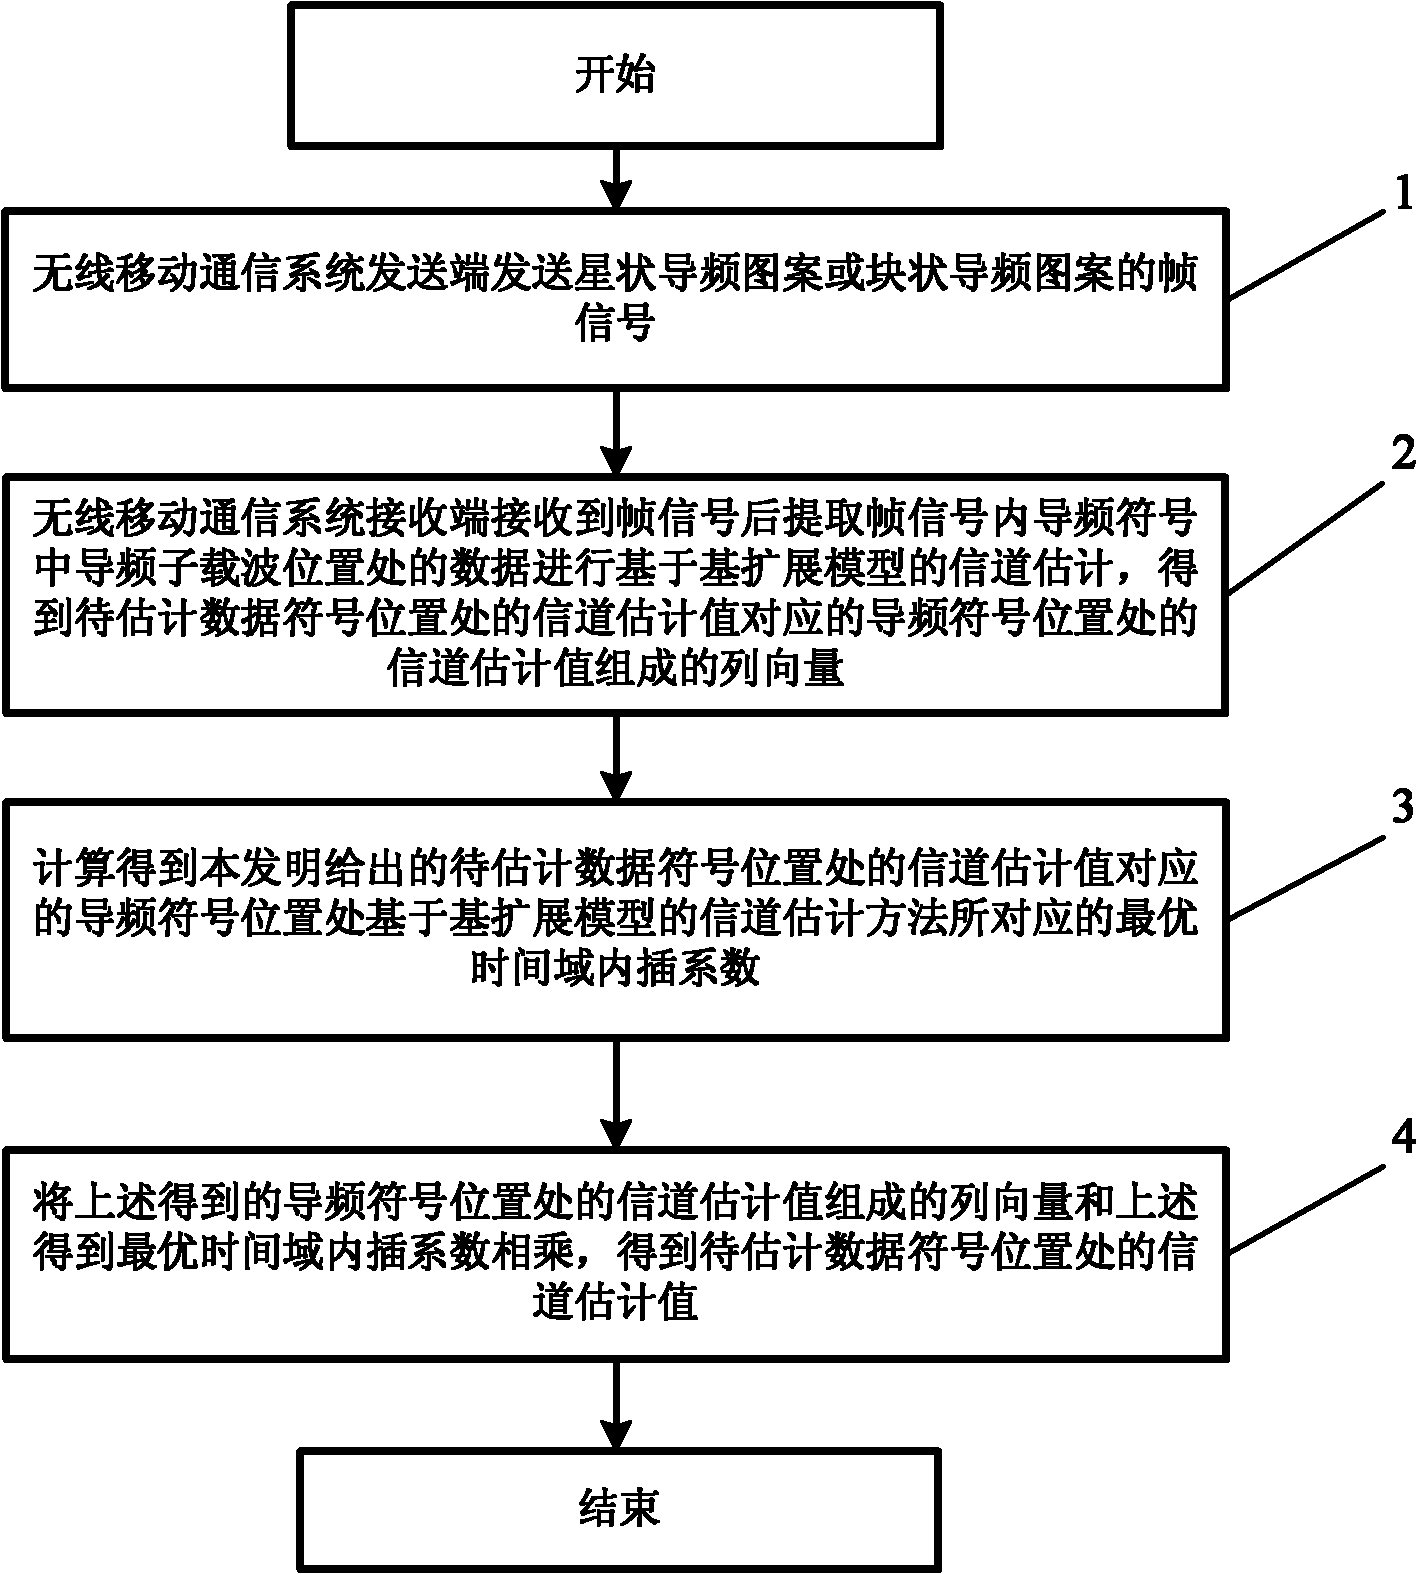 Channel estimation method under high-speed mobile environment